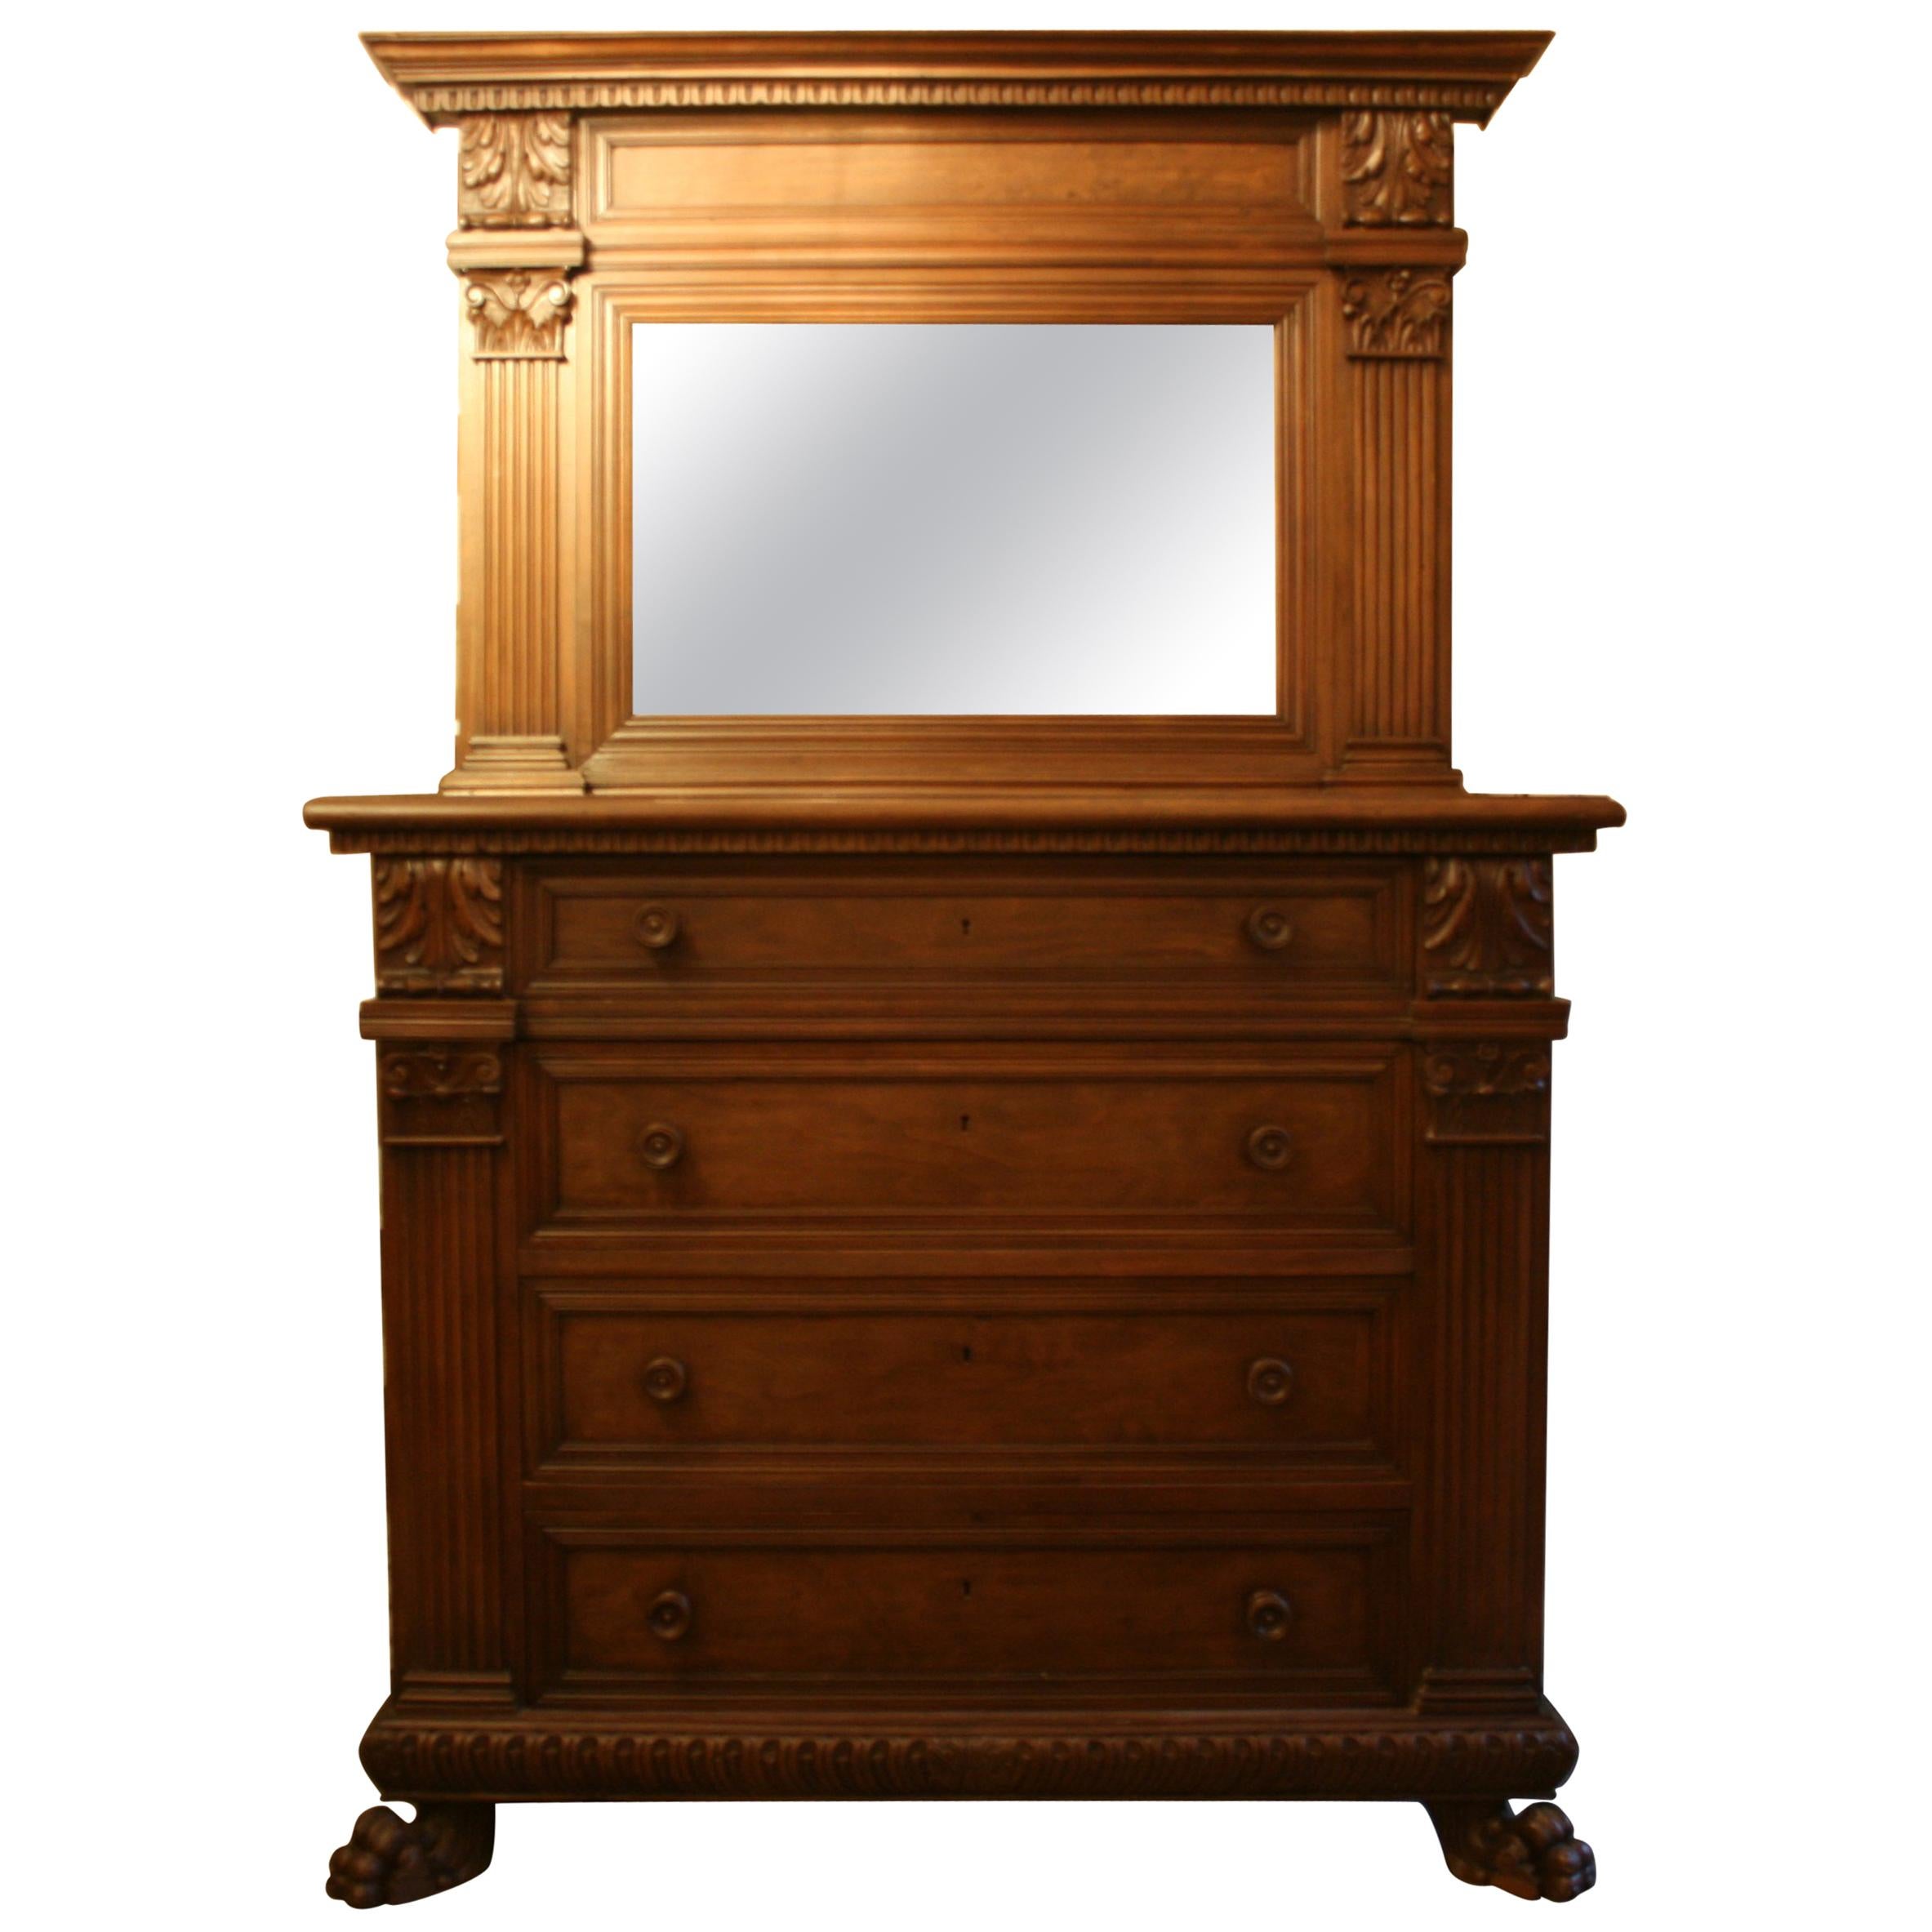 Large Italian Chest of Drawers with Mirror, Walnut, circa 1900